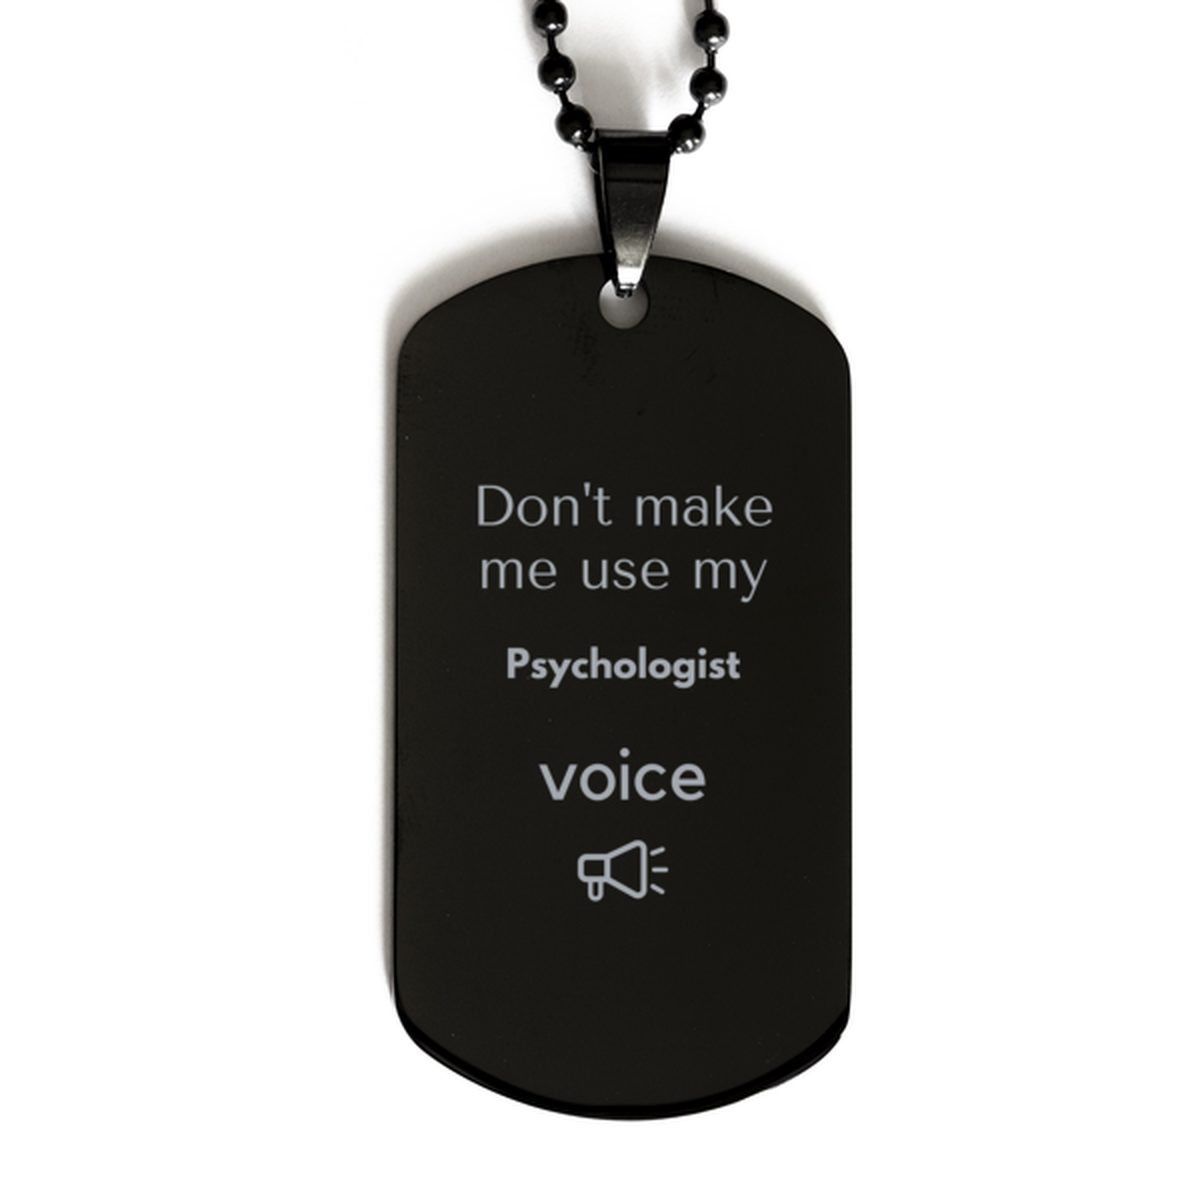 Don't make me use my Psychologist voice, Sarcasm Psychologist Gifts, Christmas Psychologist Black Dog Tag Birthday Unique Gifts For Psychologist Coworkers, Men, Women, Colleague, Friends